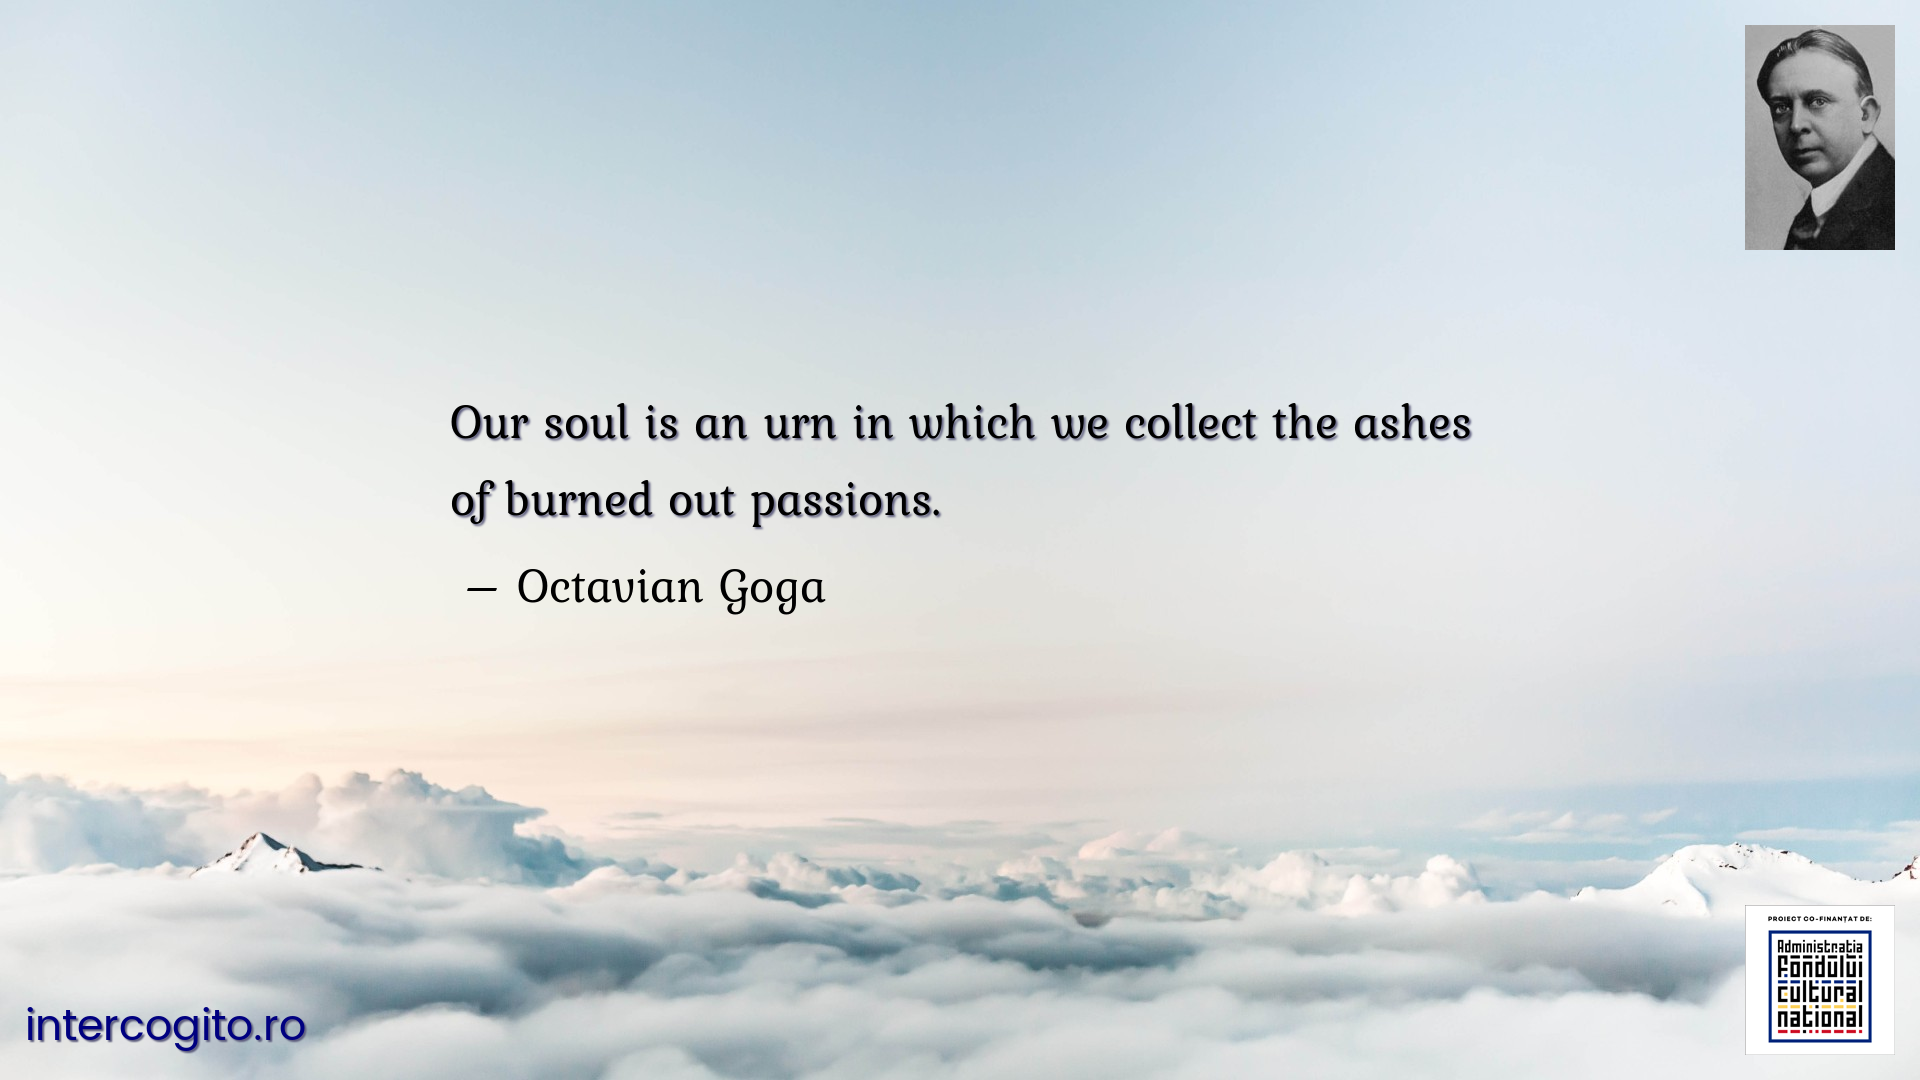 Our soul is an urn in which we collect the ashes of burned out passions.